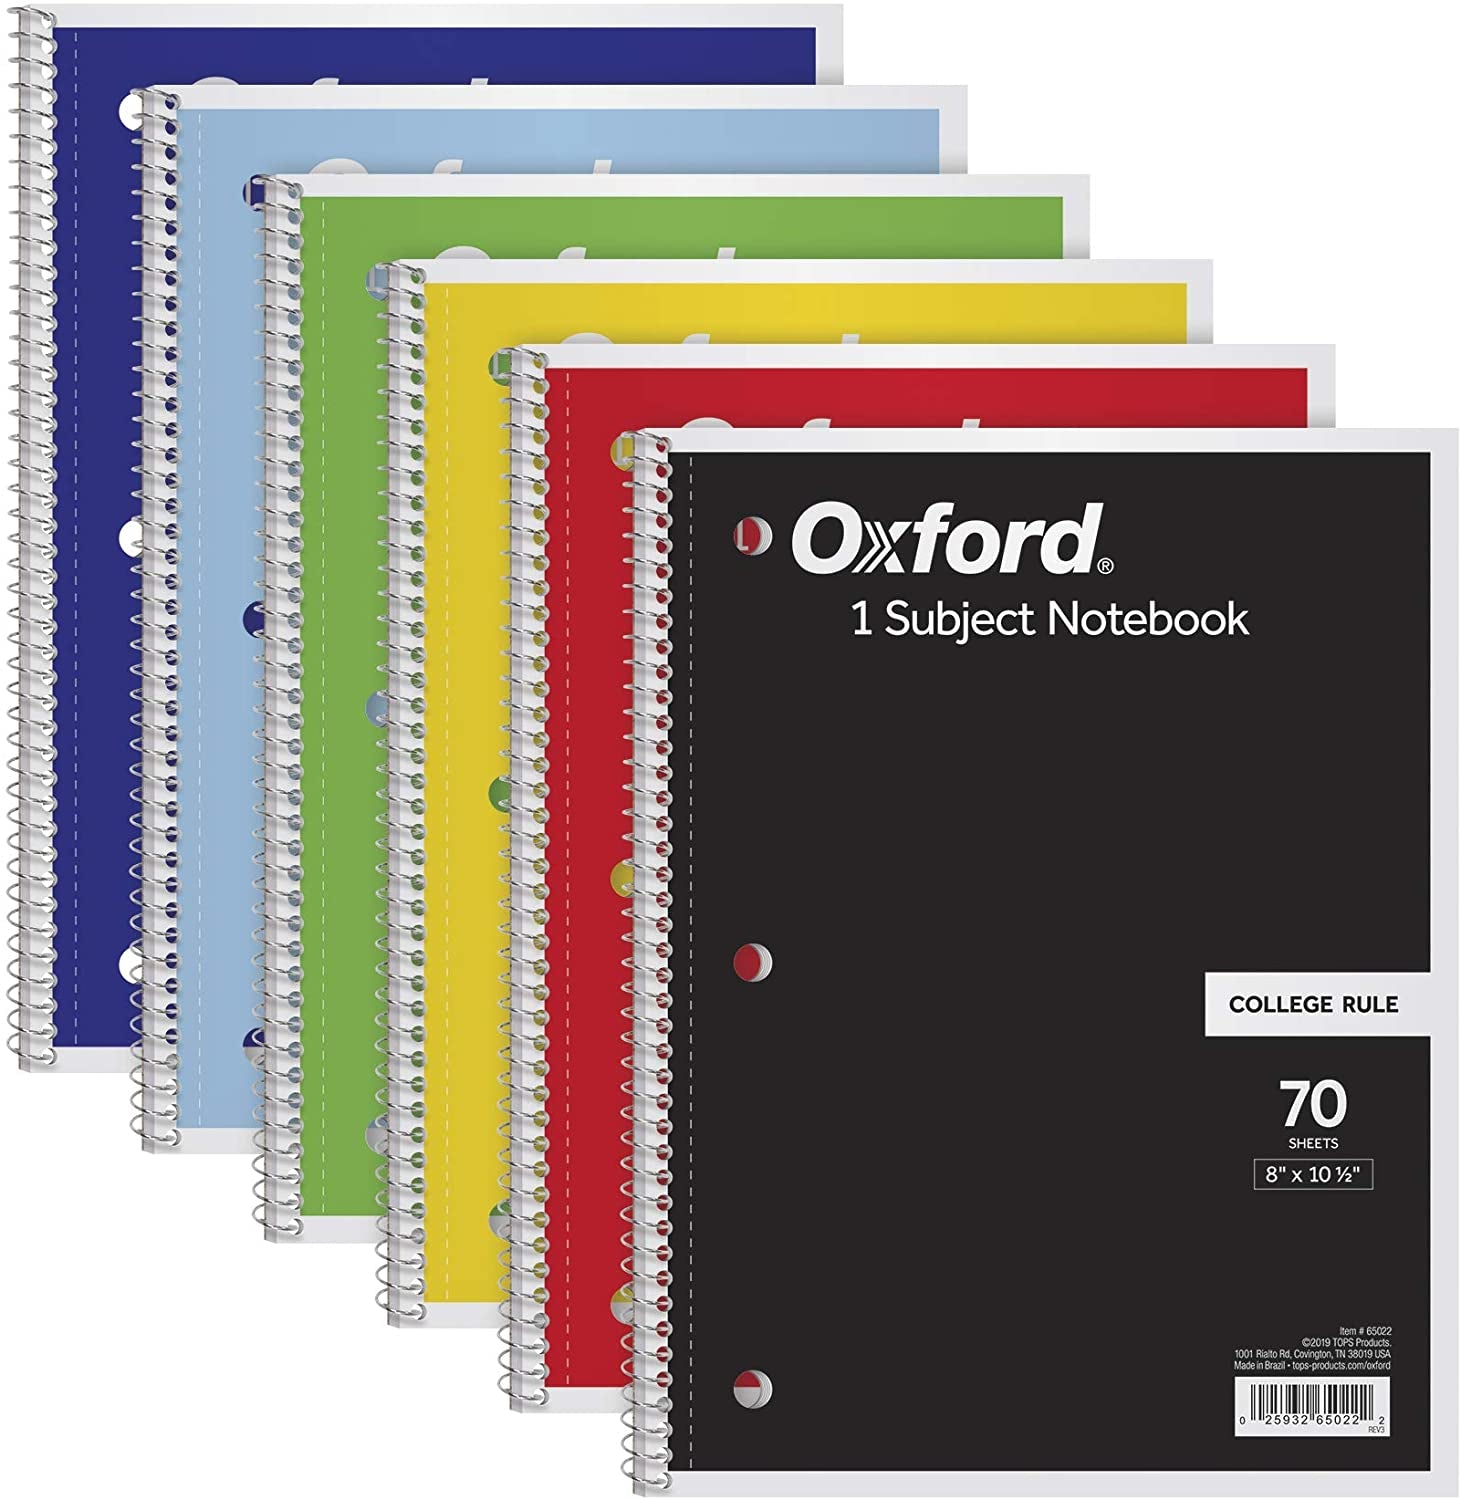 Oxford Spiral Notebook 6 Pack, 1 Subject, College Ruled Paper, 8 X 10-1/2 Inch, Color Assortment Design May Vary (65007)